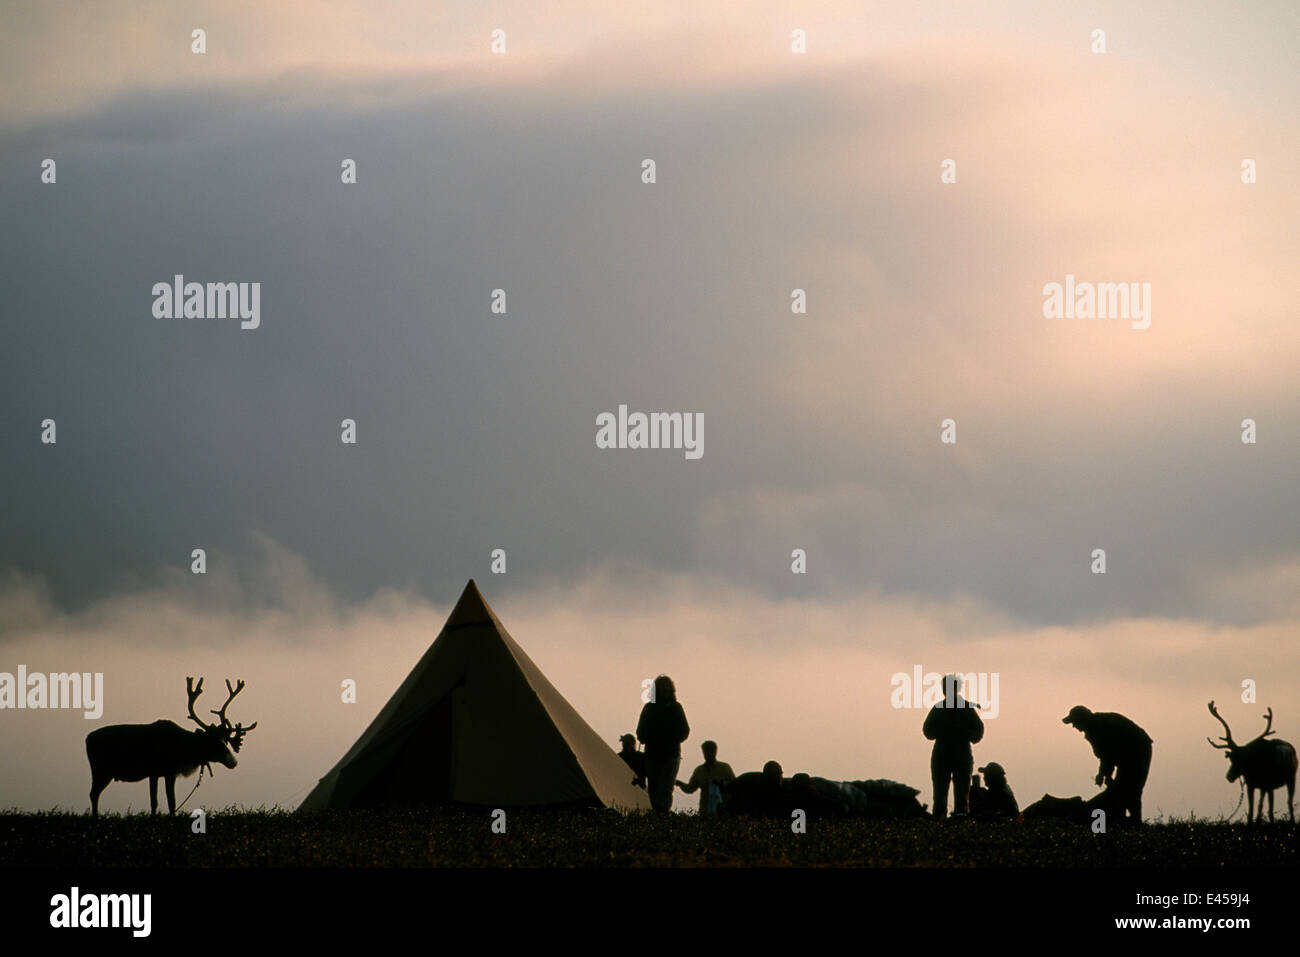 Silhouette of ecotourist Reindeer trek camp site with Saami, Lapland, Sweden. Stock Photo